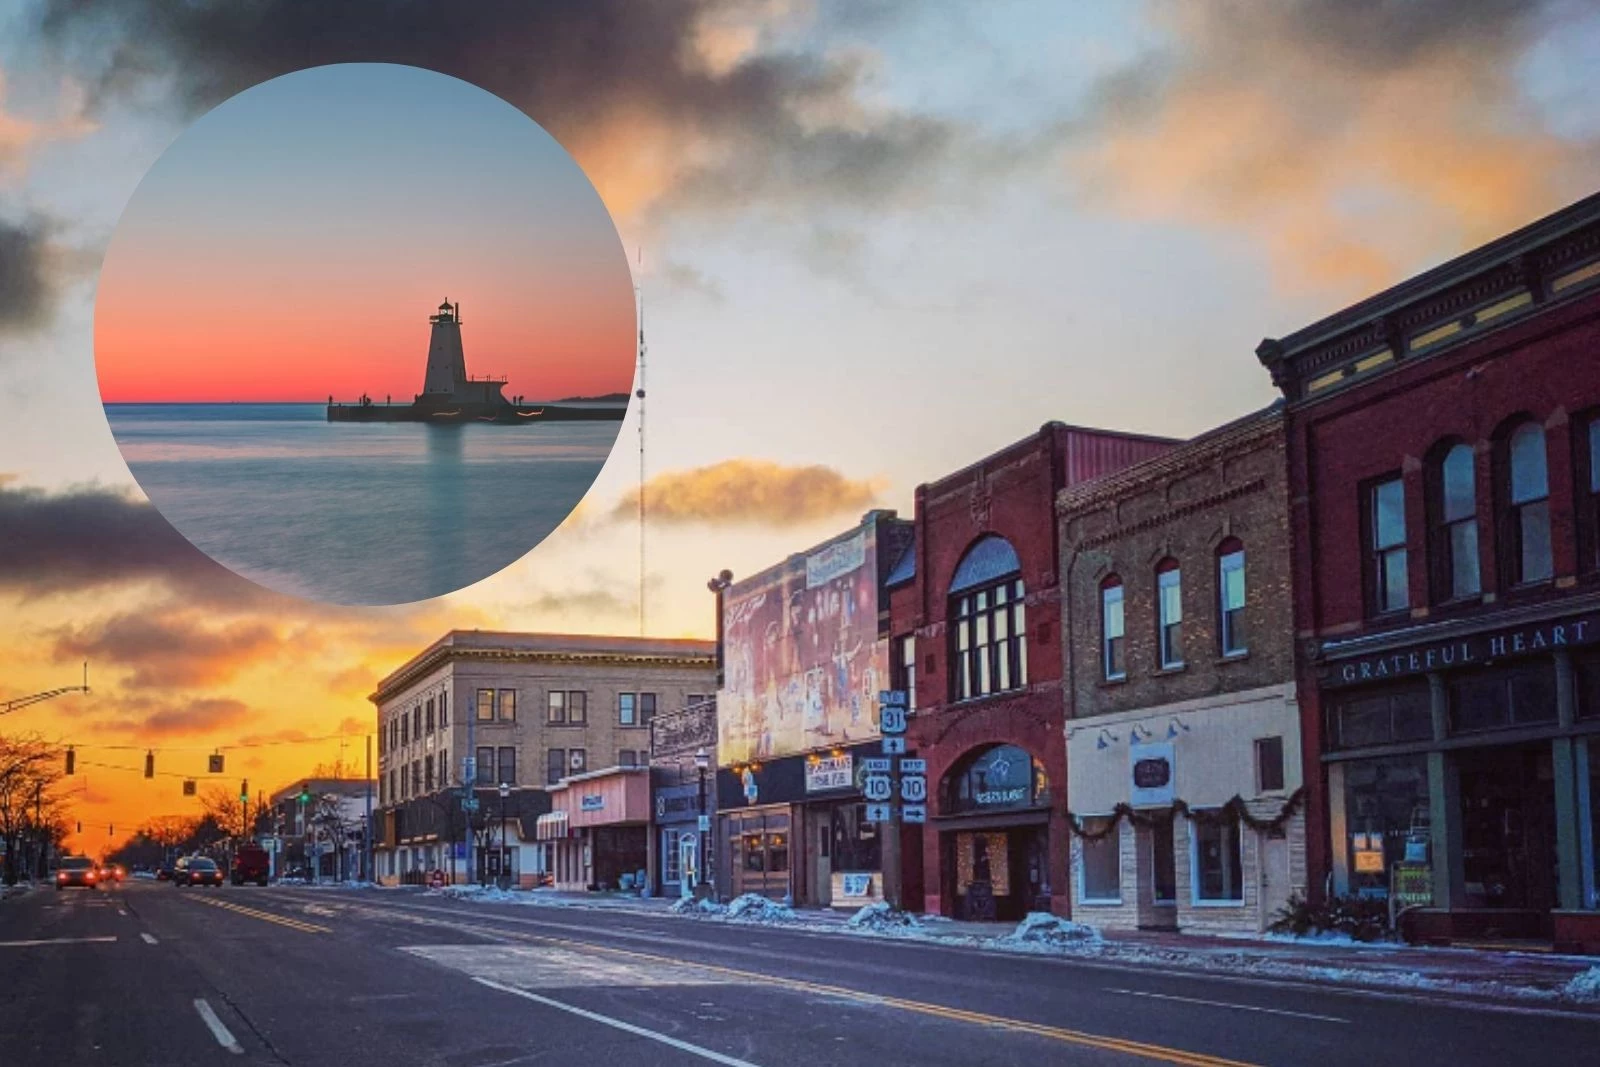 Michigan's Lakeside Gem Named Best Historic Small Town in America